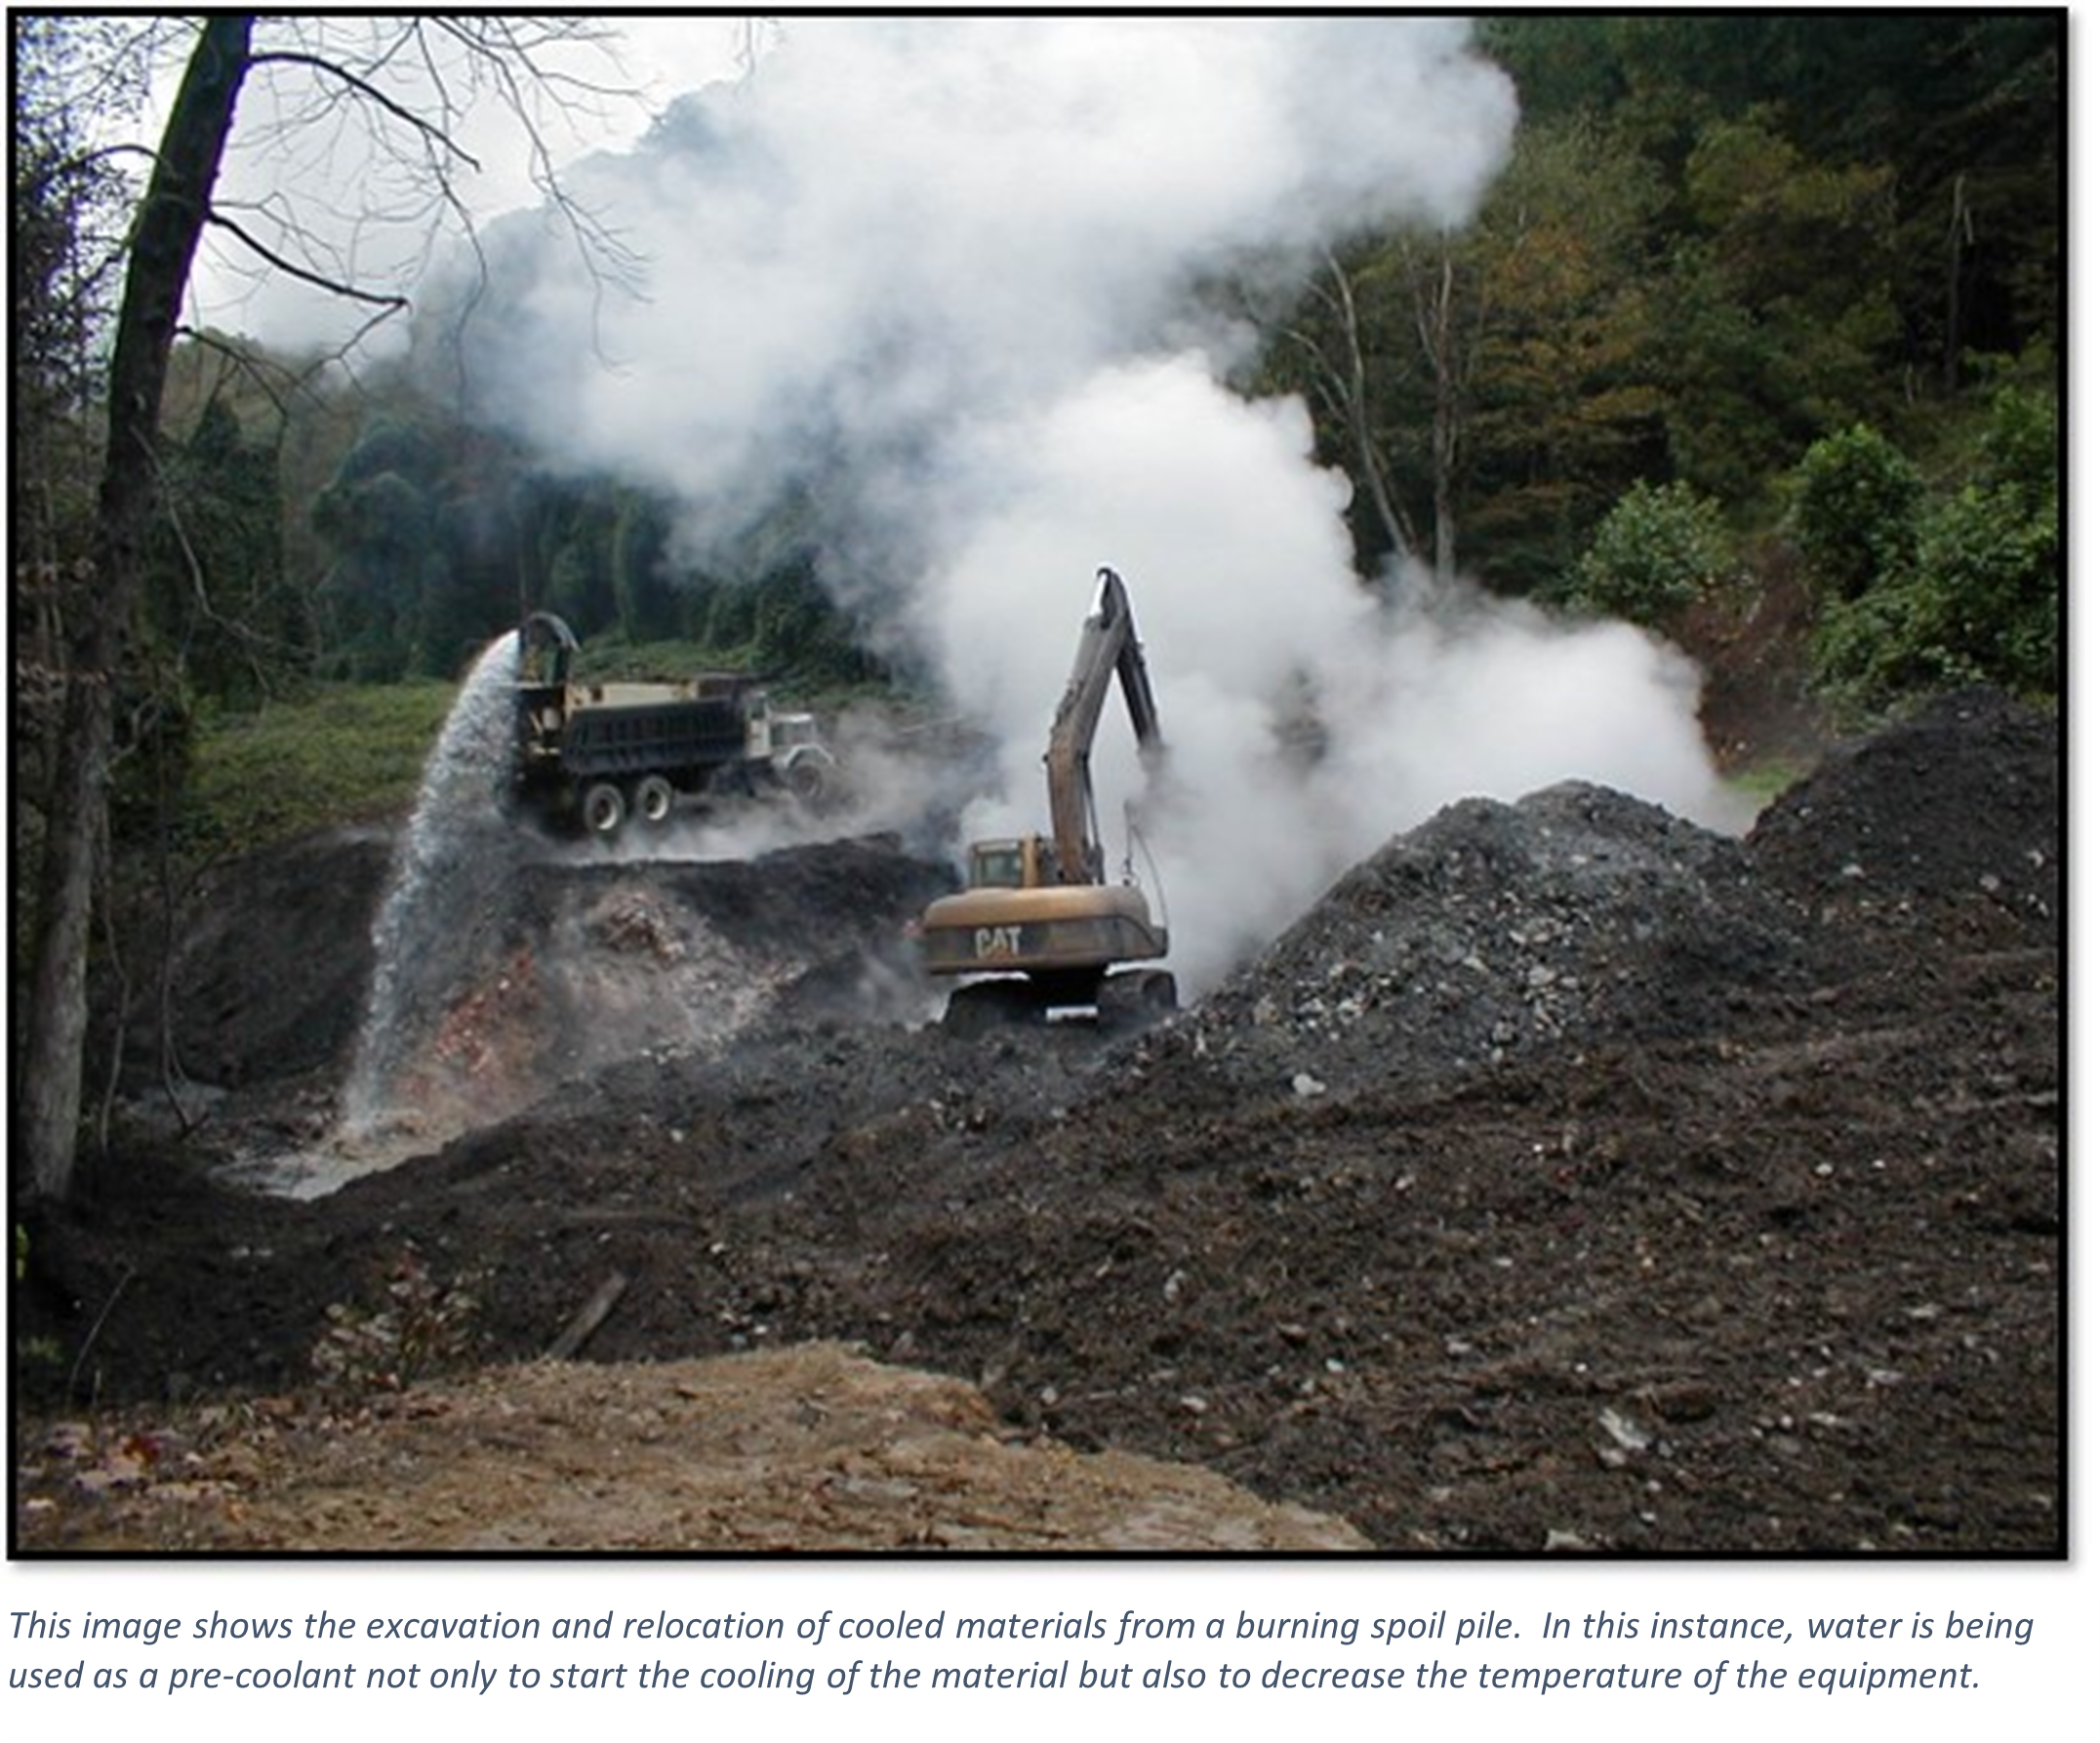 This image shows the excavation and relocation of cooled materials from a burning spoil pile.  In this instance, water is being used as a pre-coolant not only to start the cooling of the material but also to decrease the temperature of the equipment.